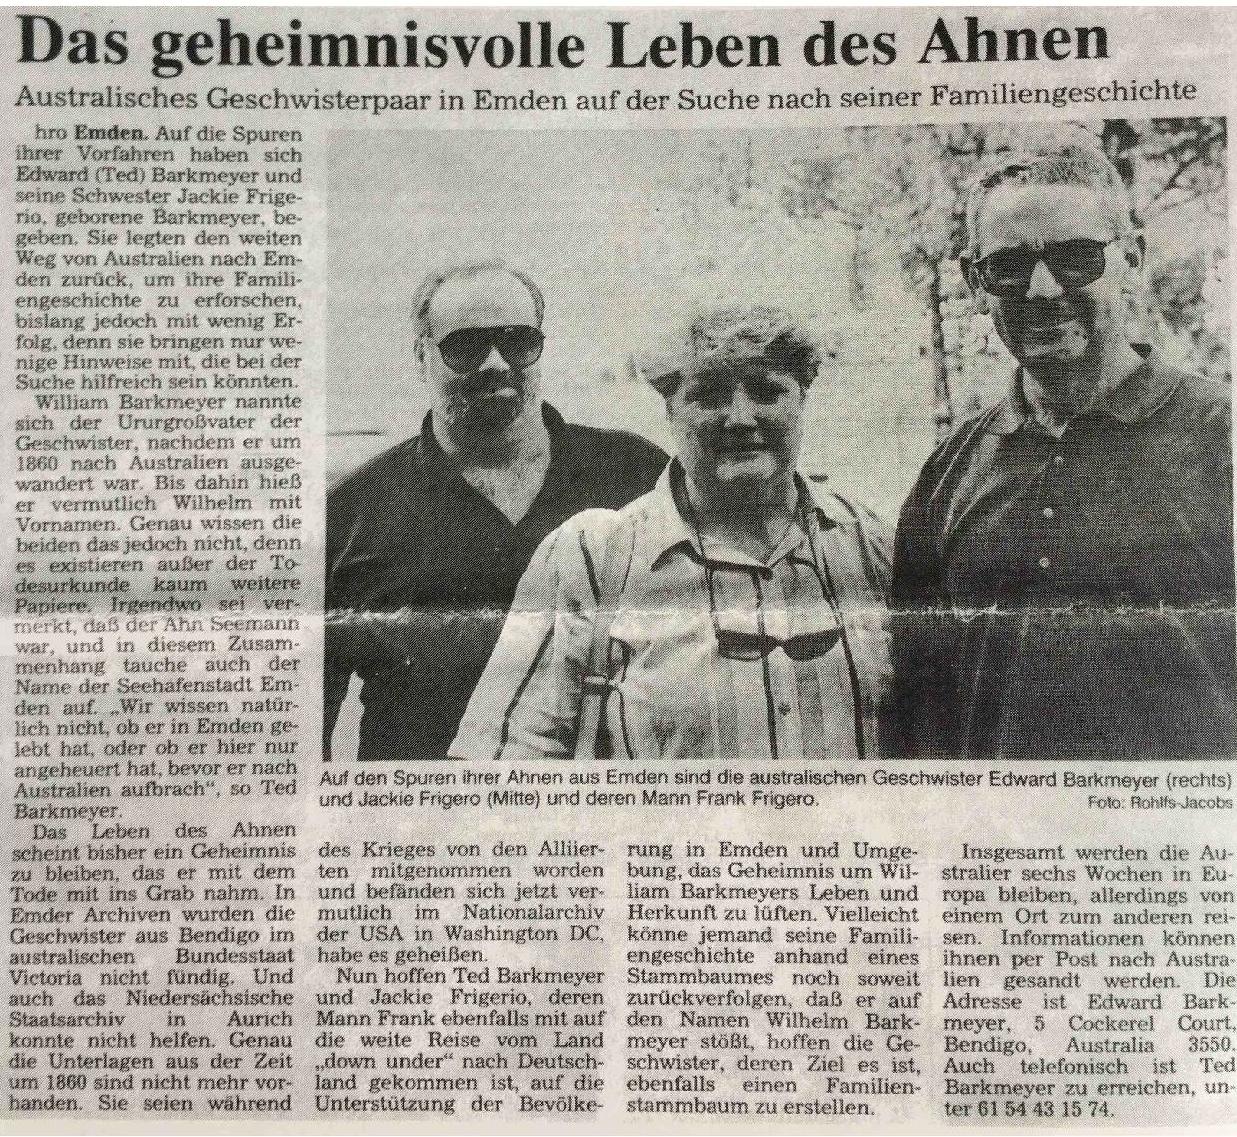 Frank Frigero, Jaqueline Frigero (nee Barkmeyer) and Ted Barkmeyer in a German newspaper article